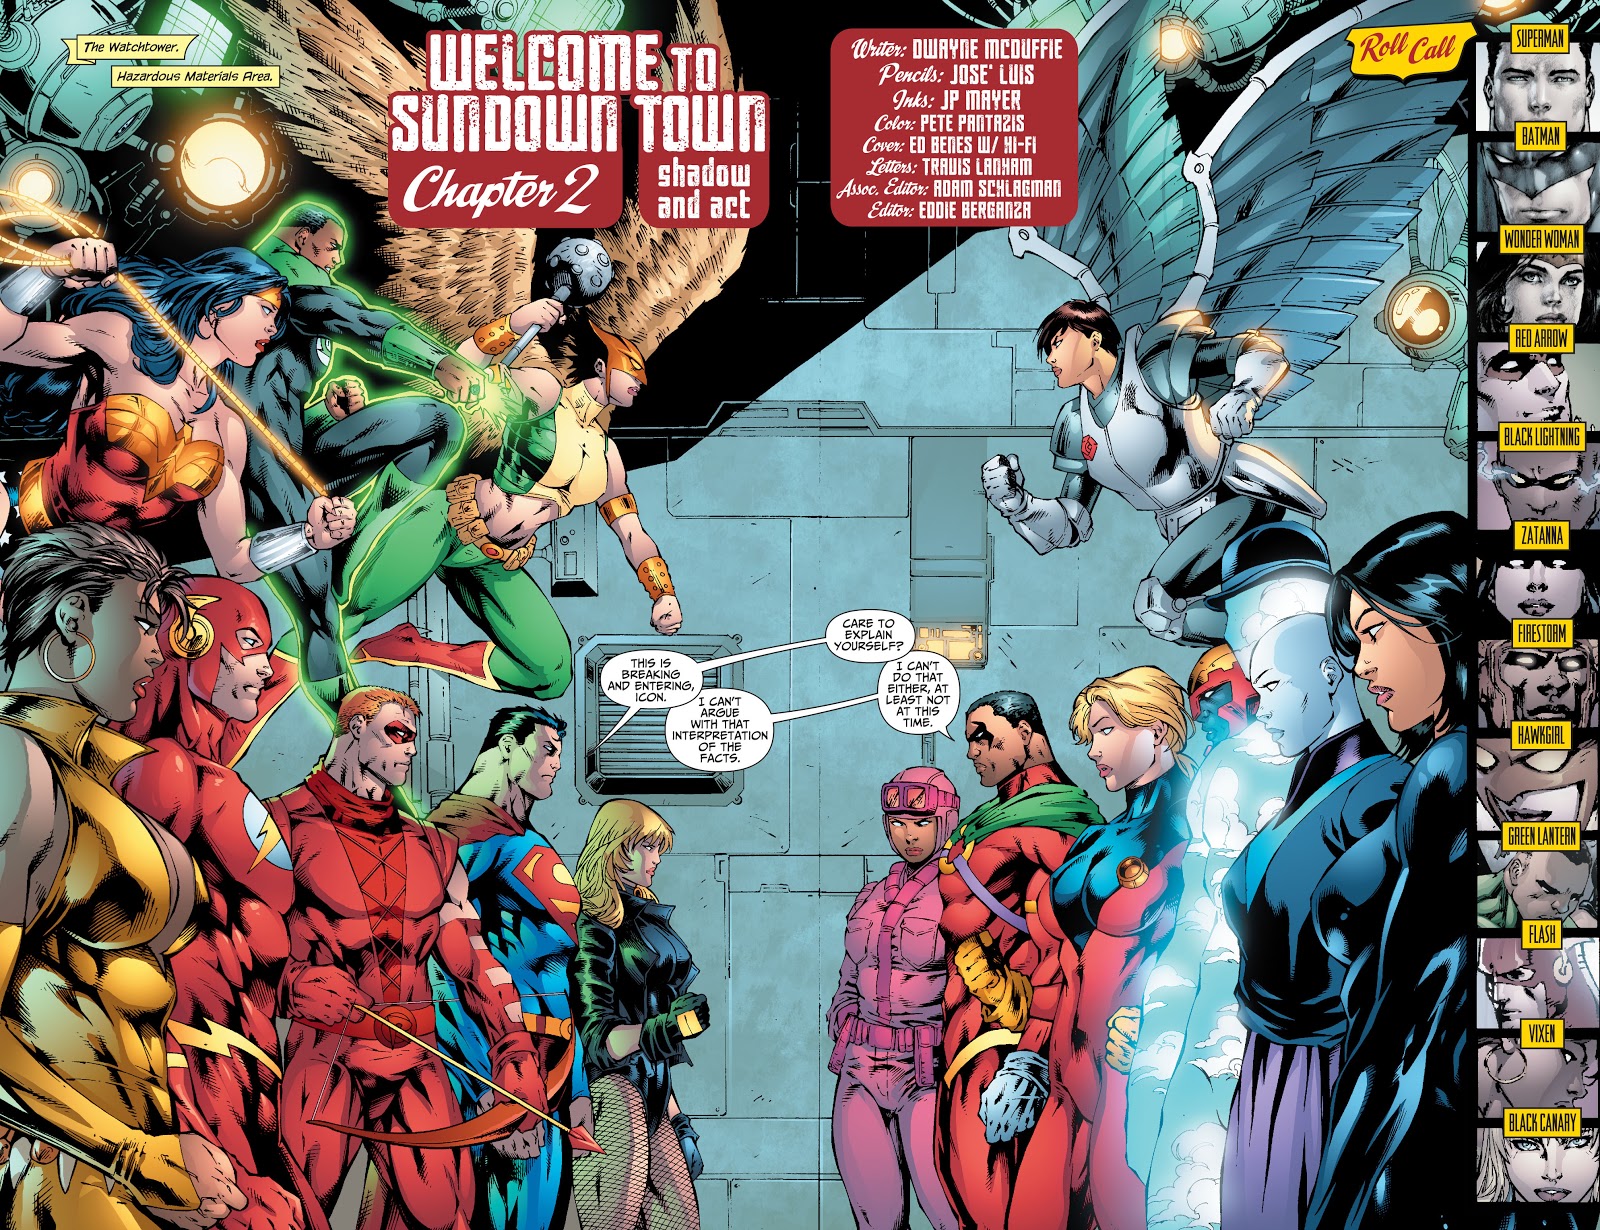 The Shadow Cabinet (Justice League of America Vol. 2 #28)